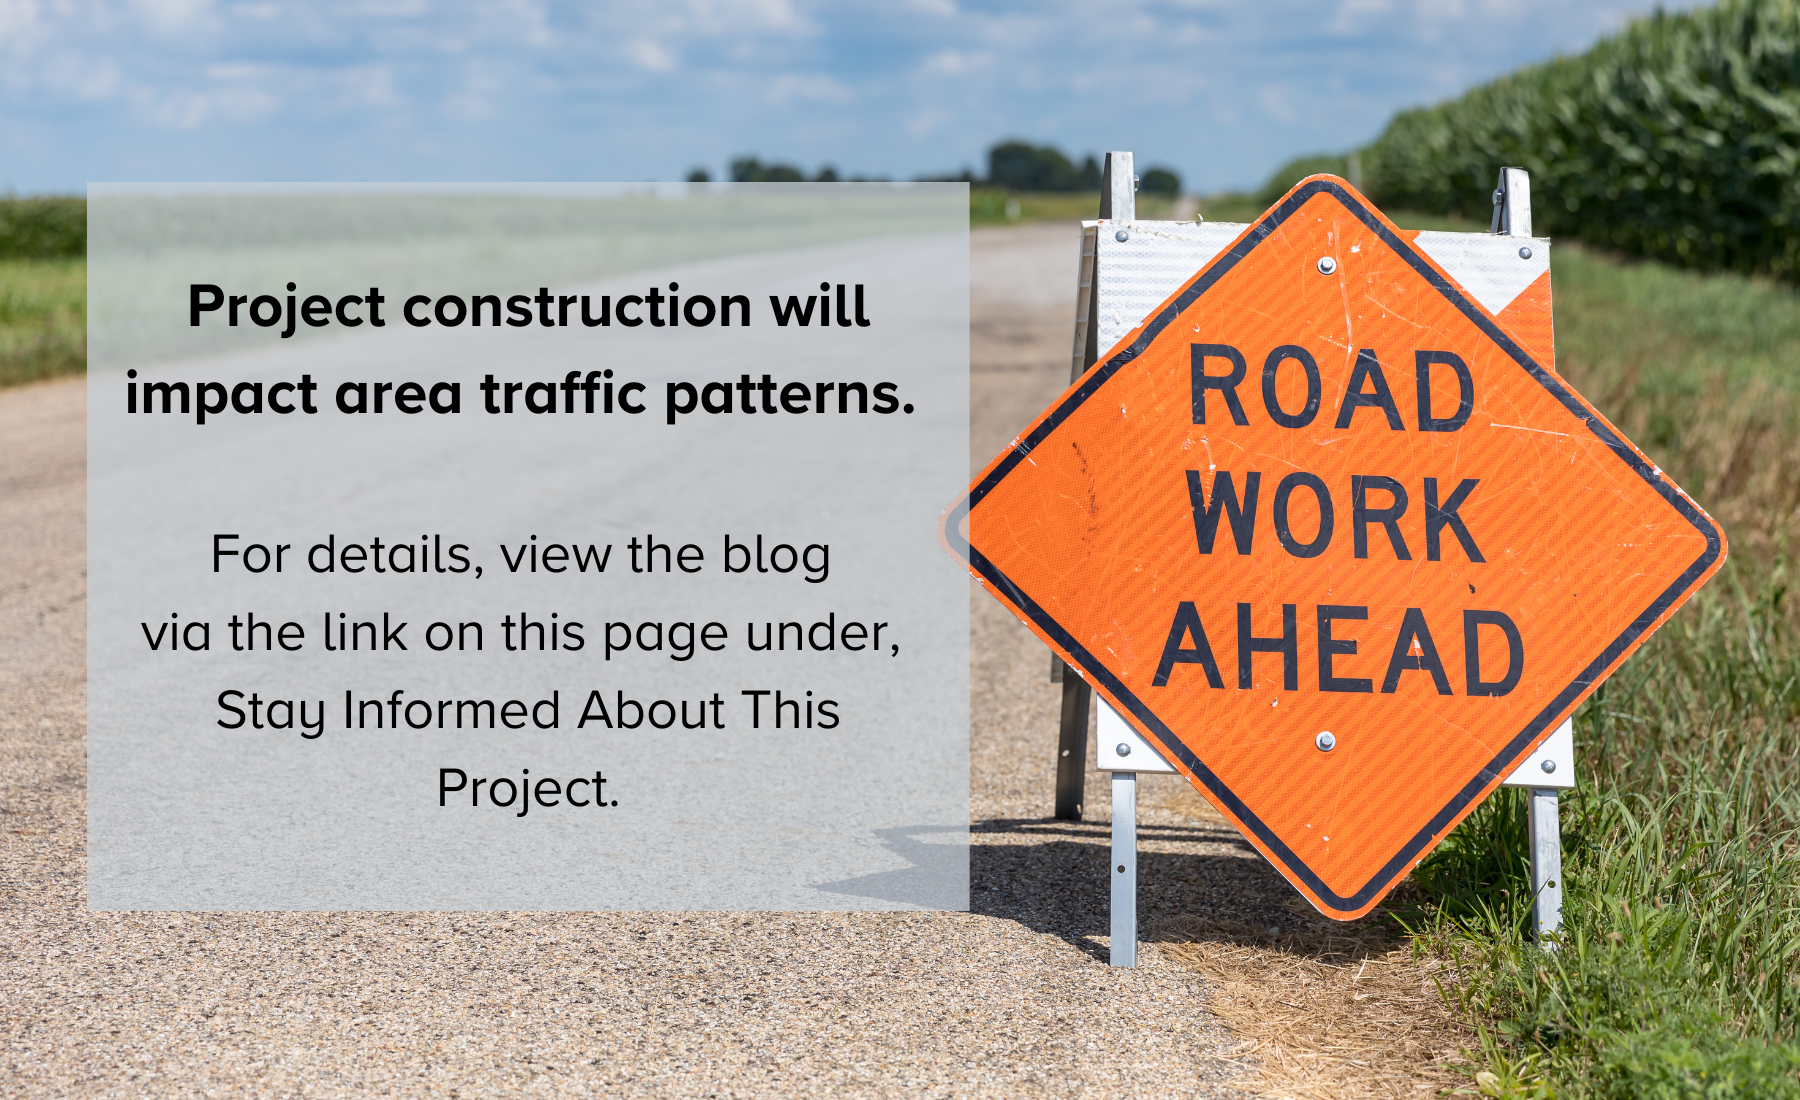 Generic Road Construction Impacts Image for Project Page